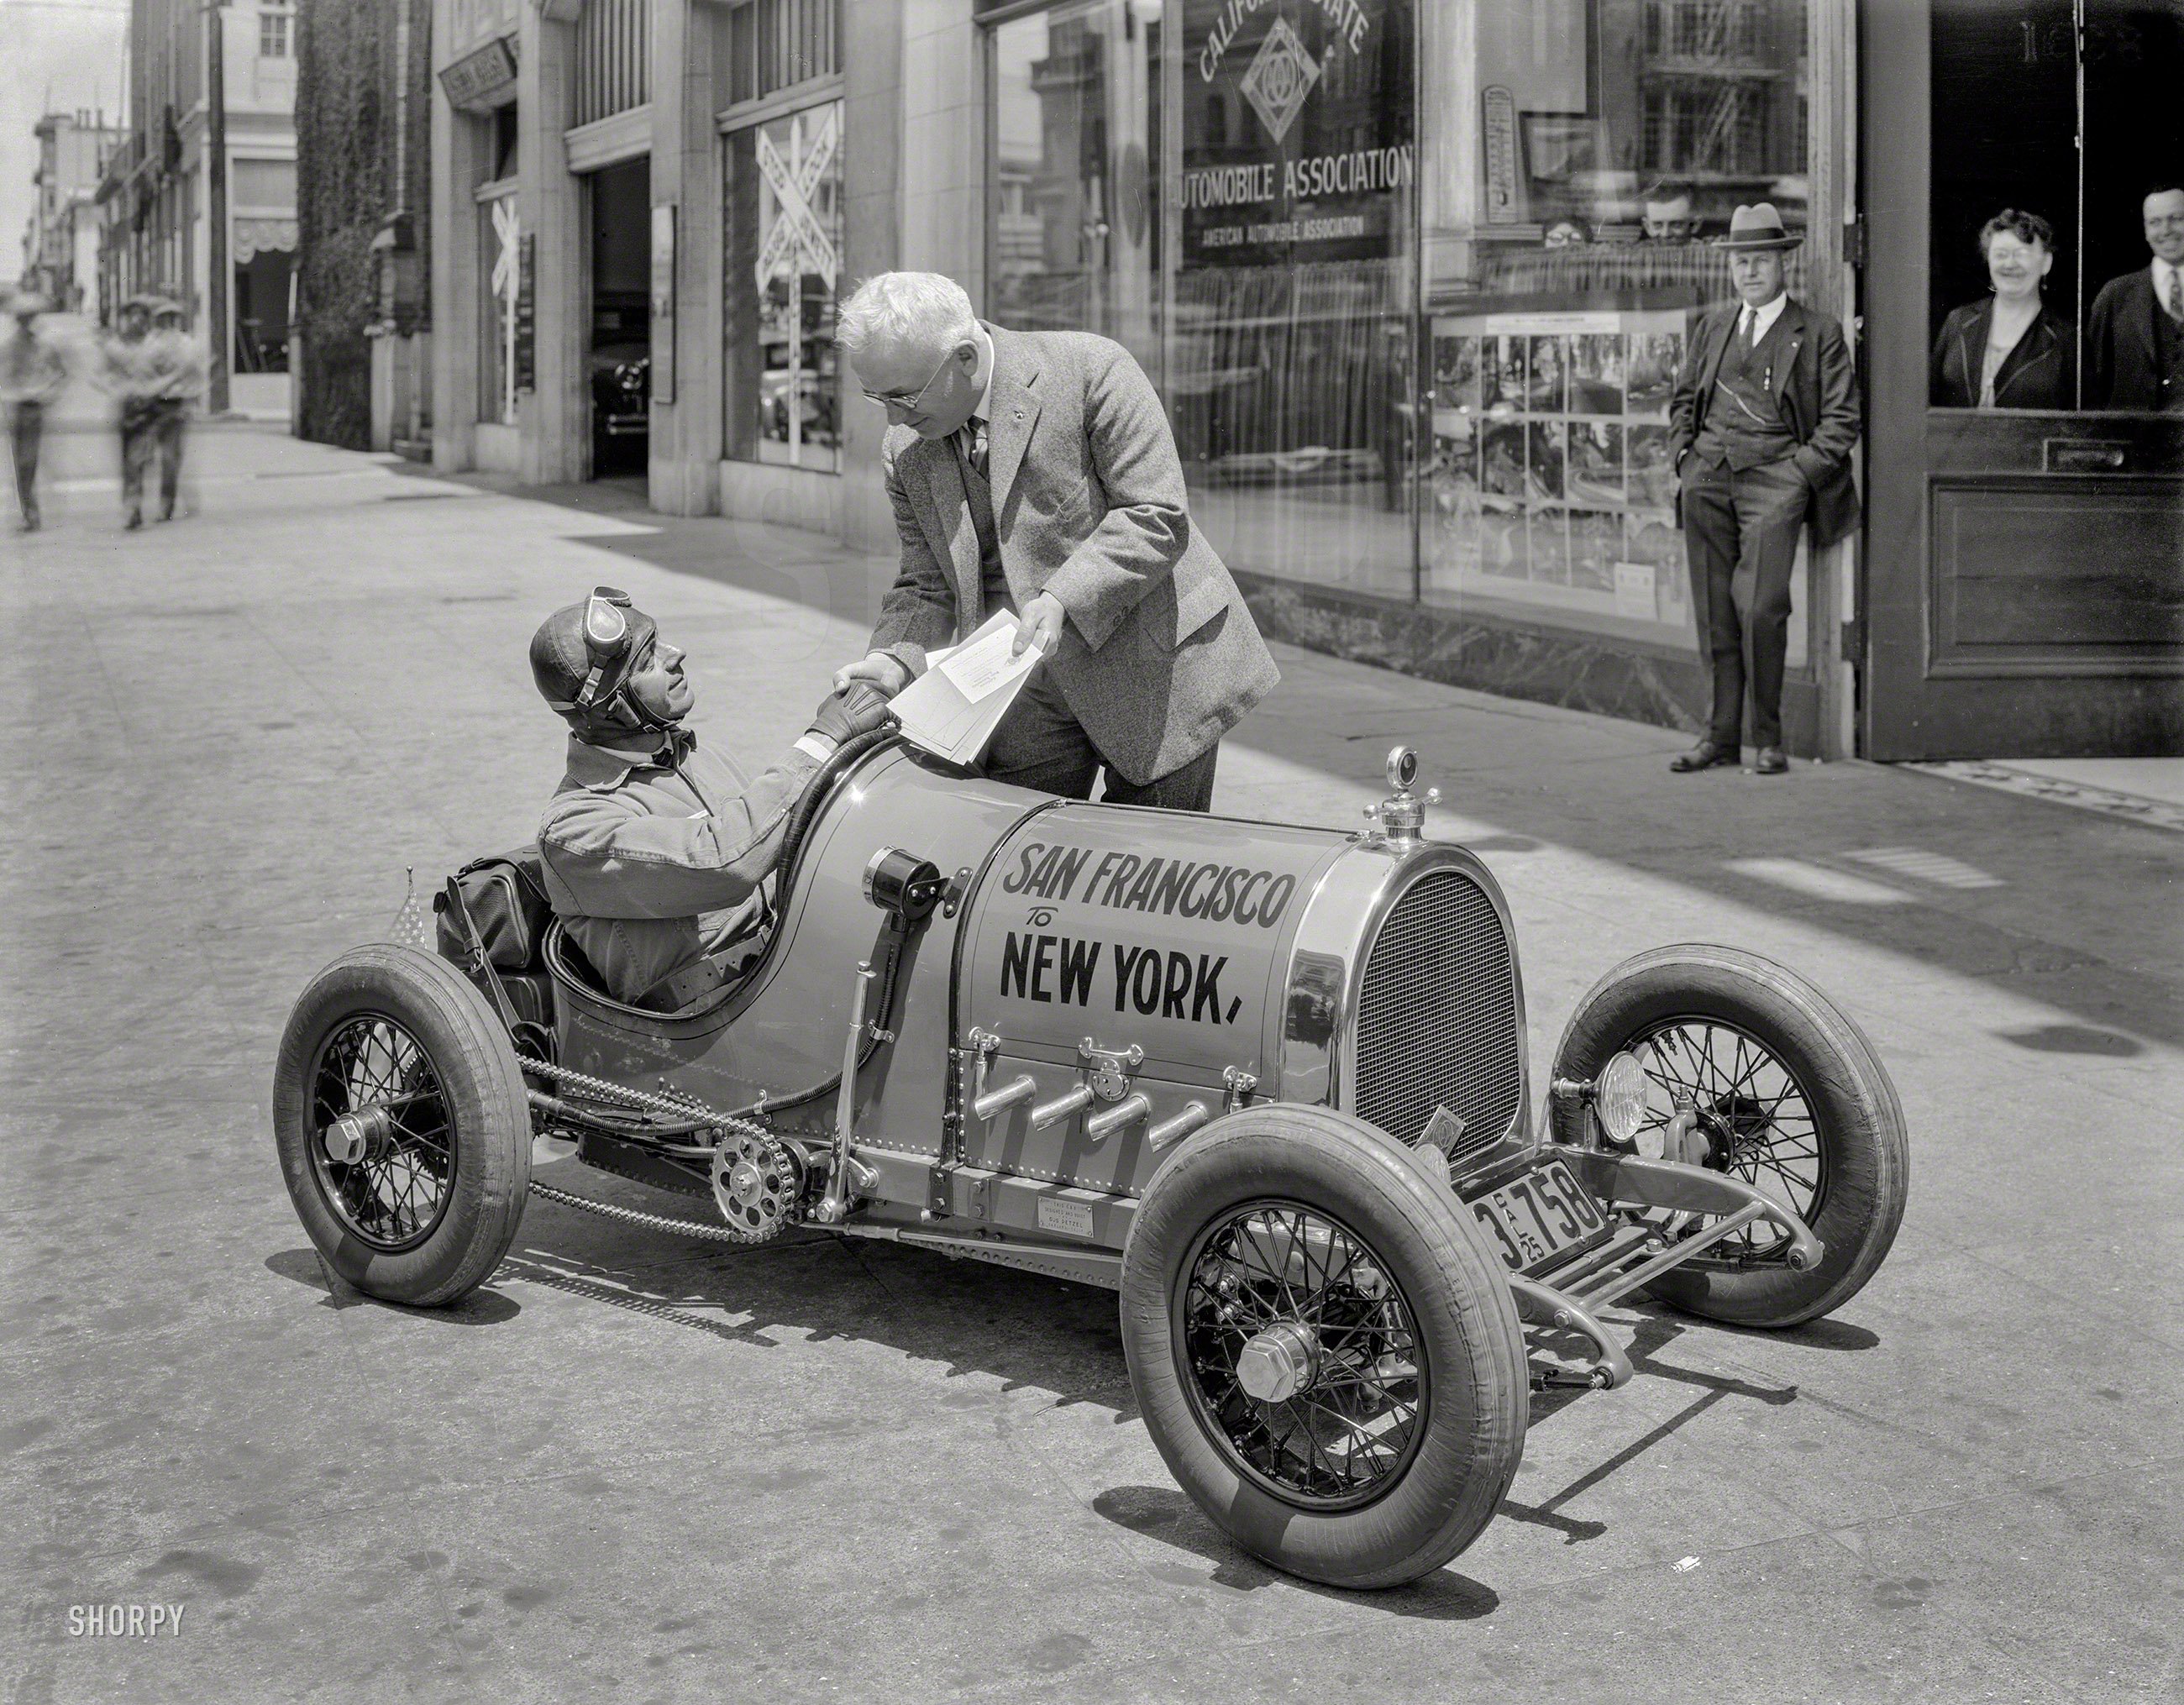 &nbsp; &nbsp; &nbsp; &nbsp; The smallest automobile in the world –- Designed and built by Gus Petzel of Alameda, California. The car has a 4-cylinder air cooled motor, 3 speeds, electric lights and starter, 60-inch wheelbase, 21x4 airplane tires, and weighs 560 pounds. It makes 52 miles per gallon and has a speed of 65 miles on the road and 80 miles on the track. Cost $2,000 to build. -- Promotional postcard
San Francisco, 1925. "California State Automobile Association -- Gus Petzel 'Baby Car' at start of cross-country run." A scene from the inauguration of the historic Trans-Continental Sidewalk. 8x10 nitrate negative. View full size.